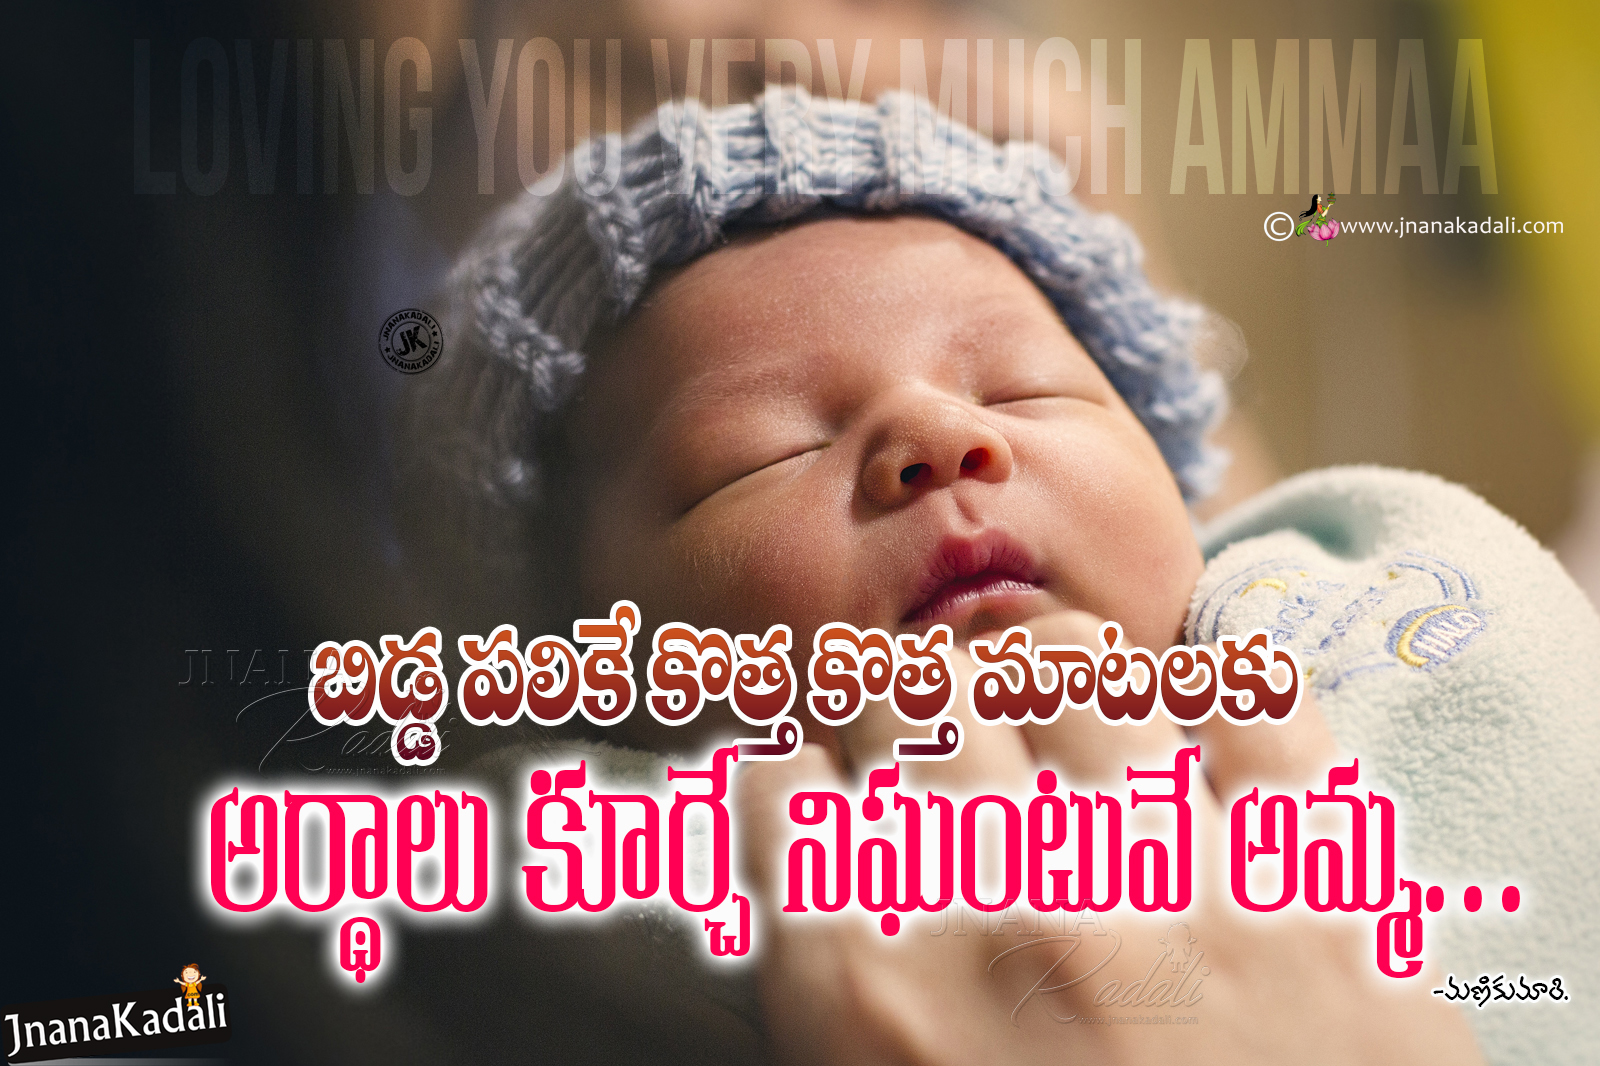 Mother and Father Greatness Quotes hd wallpapers in Telugu-Famous ...